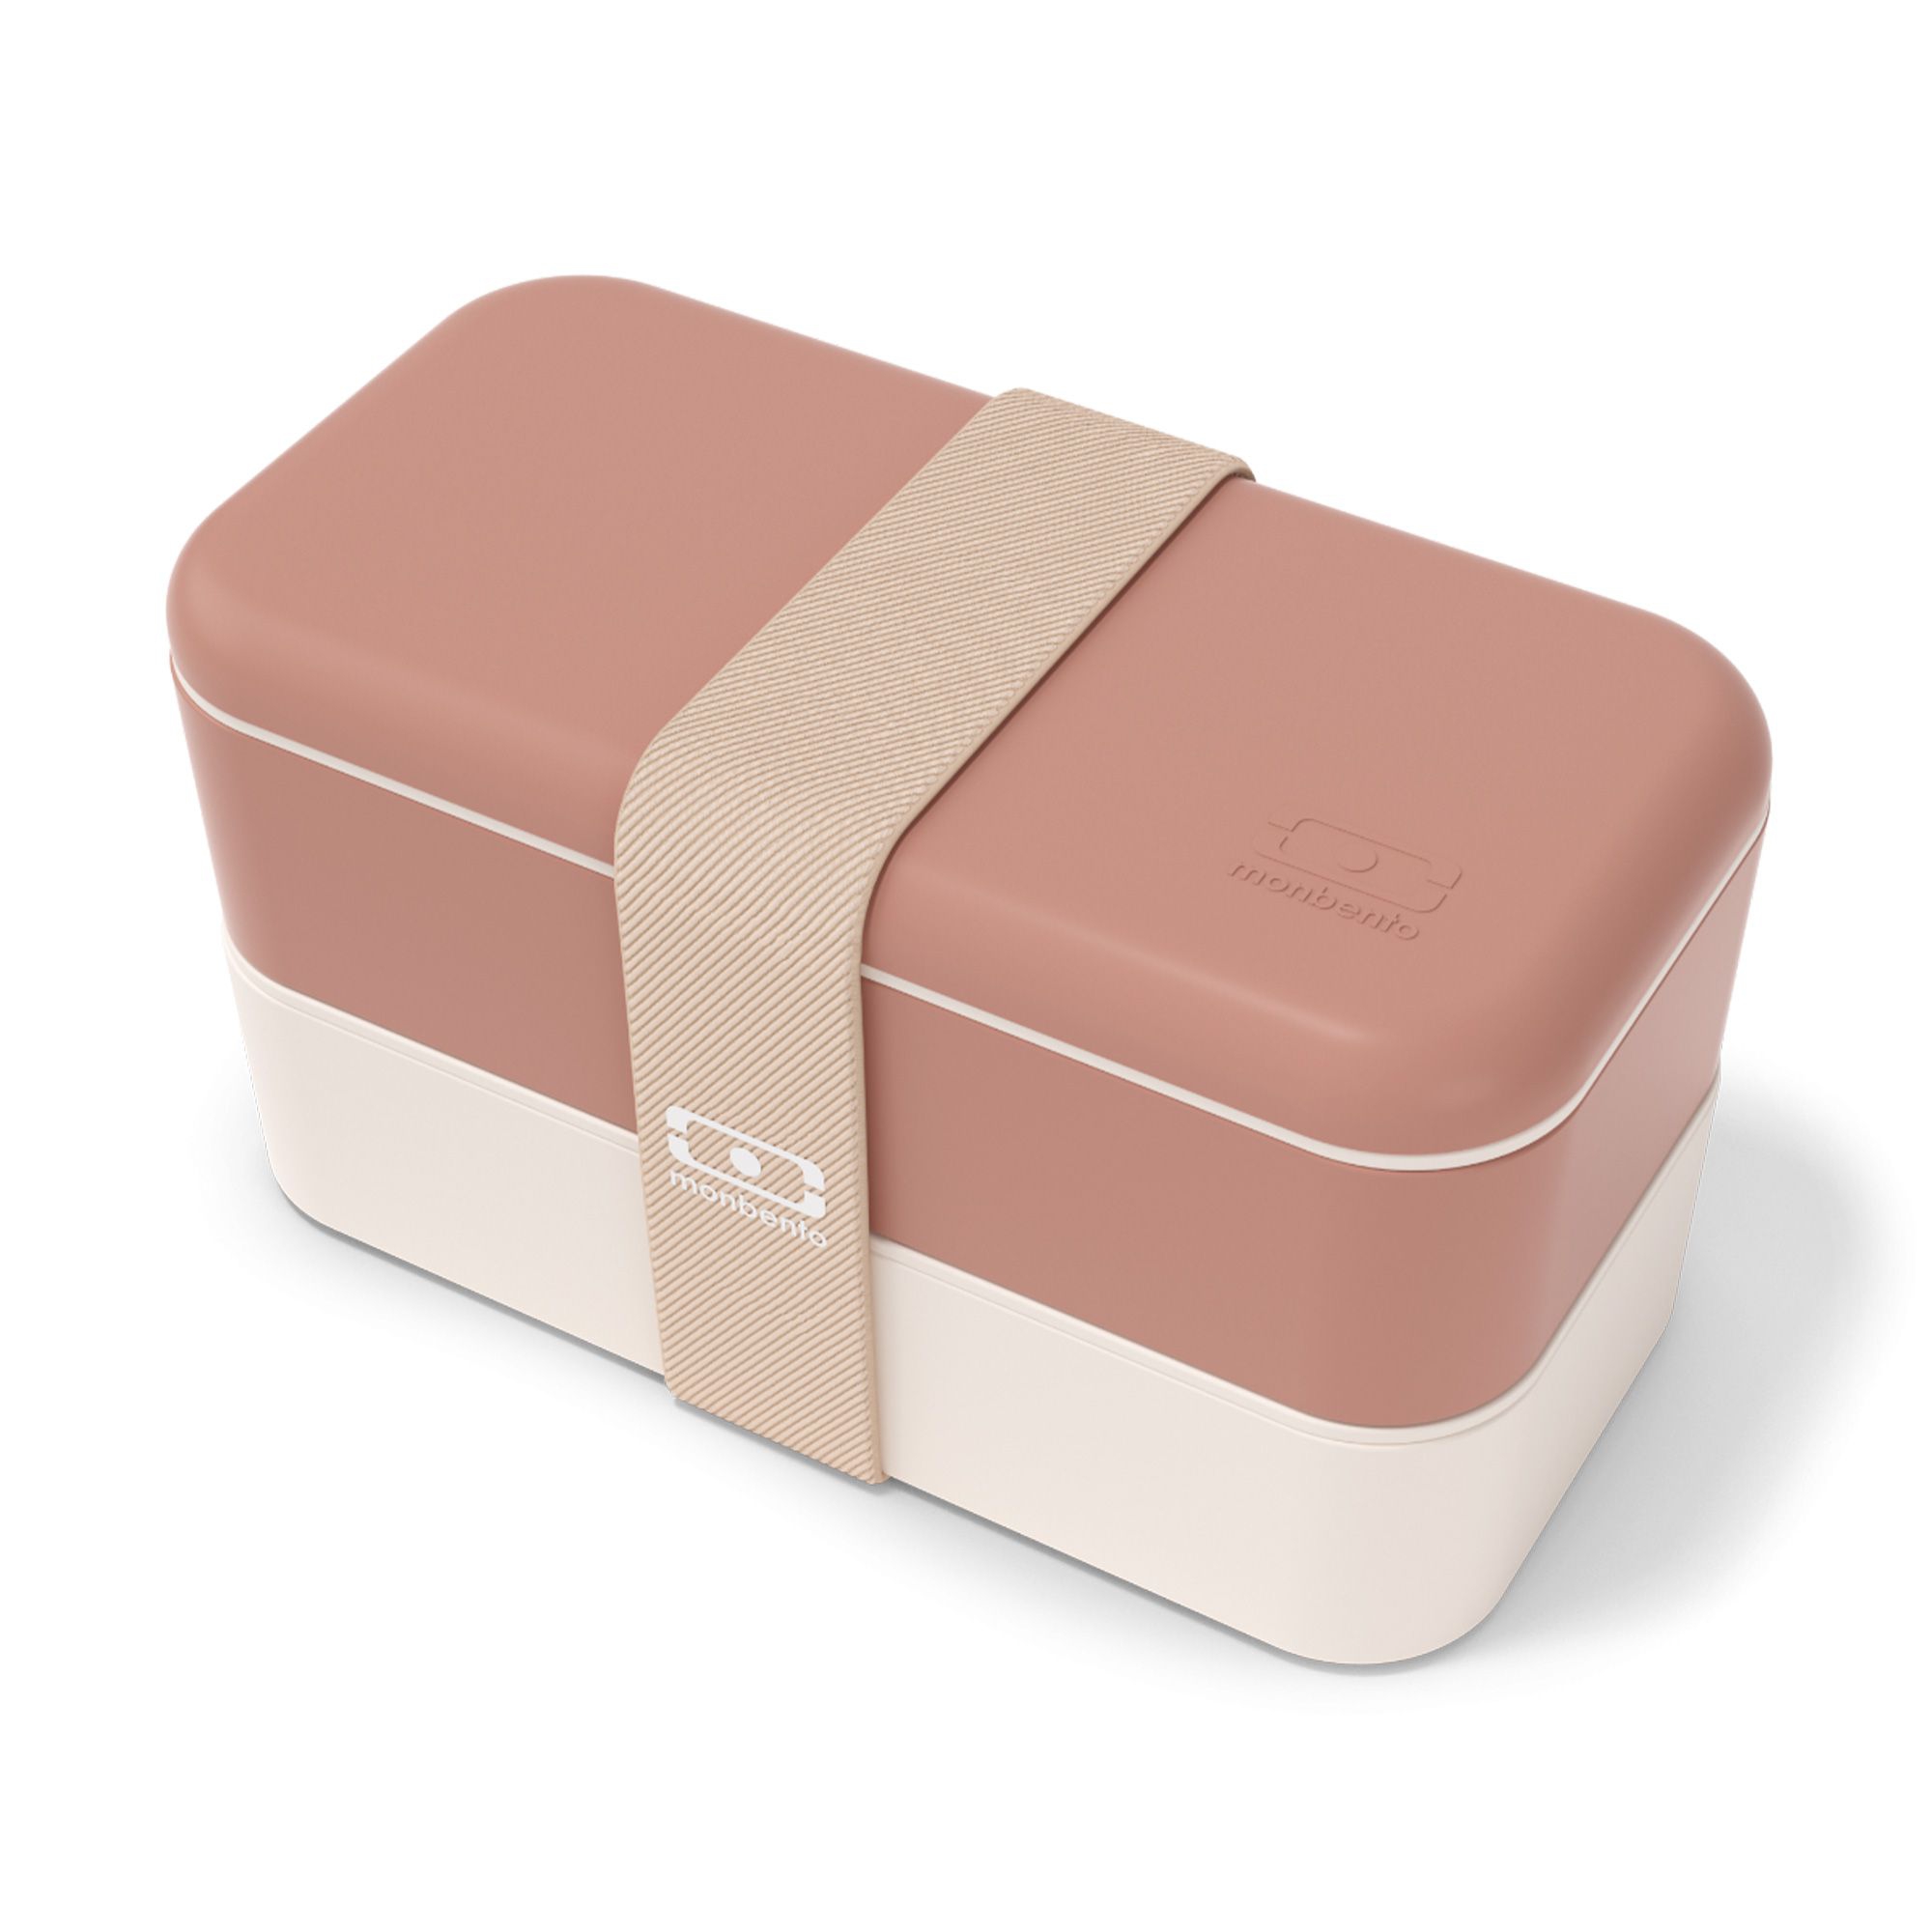 Set of 3 Pink Storage Box, 0.15L, Sold by at Home